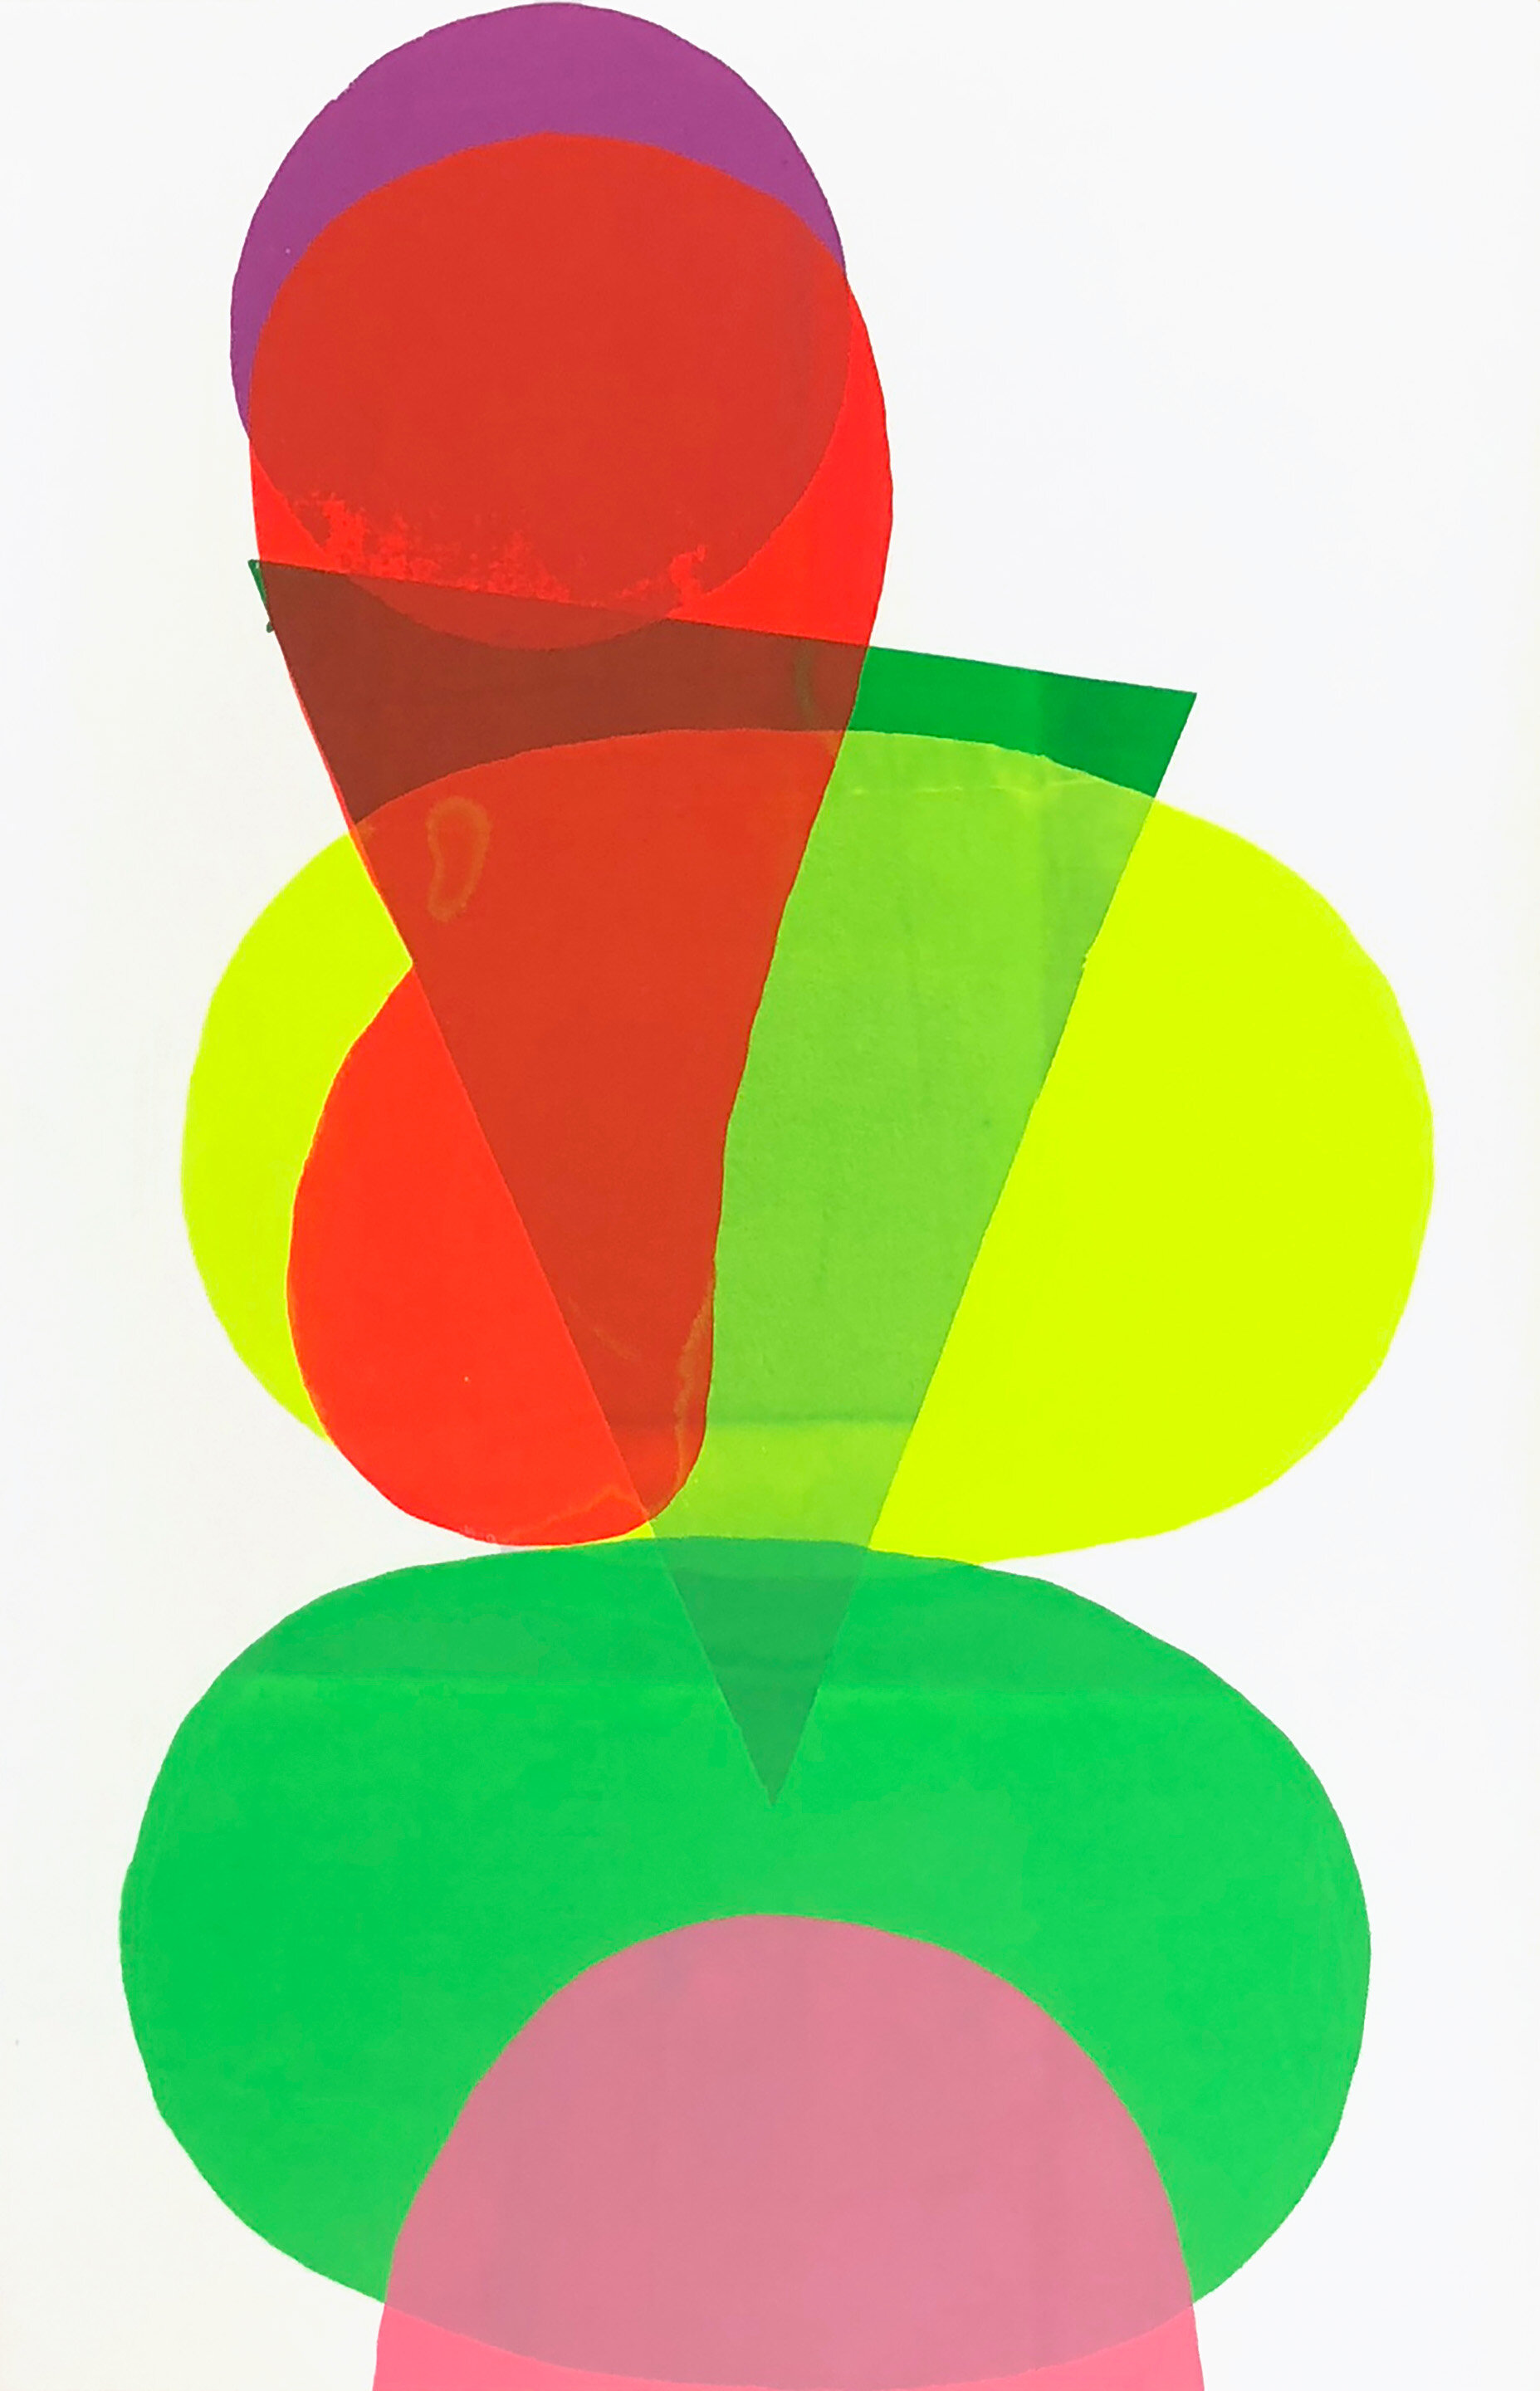    Shapes 4  , 2013  Monoprint, Silkscreen ink on paper  40 x 26 in. 